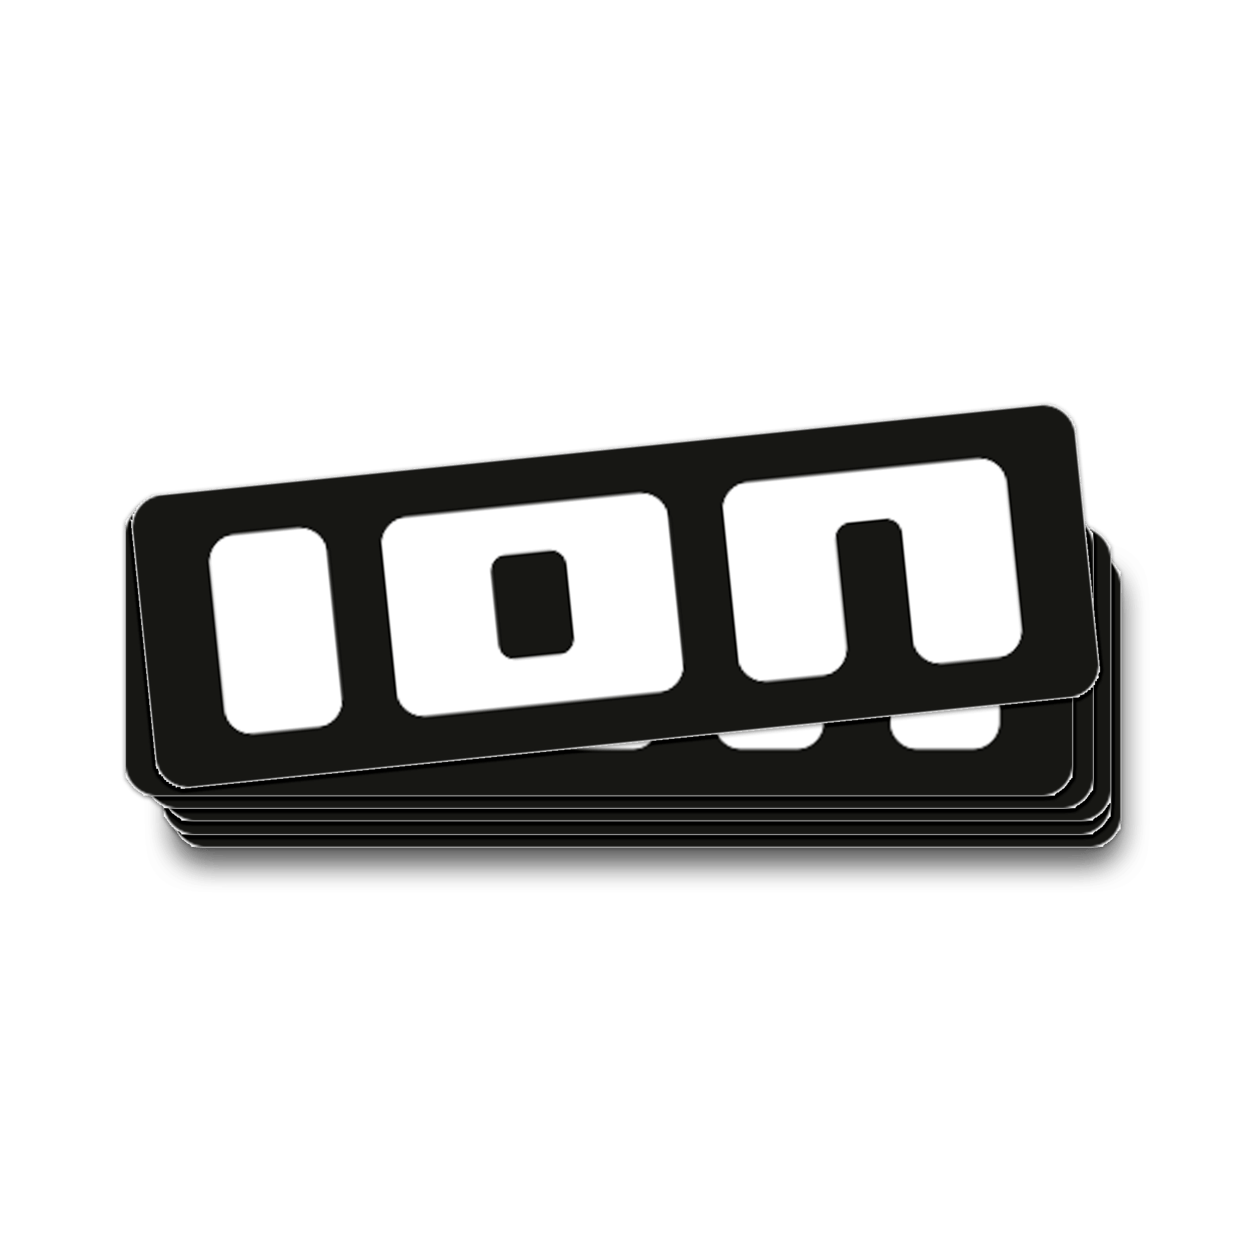 ION Sticker Sail (10pcs) 2022 - Worthing Watersports - 9010583077338 - Promo - ION Water